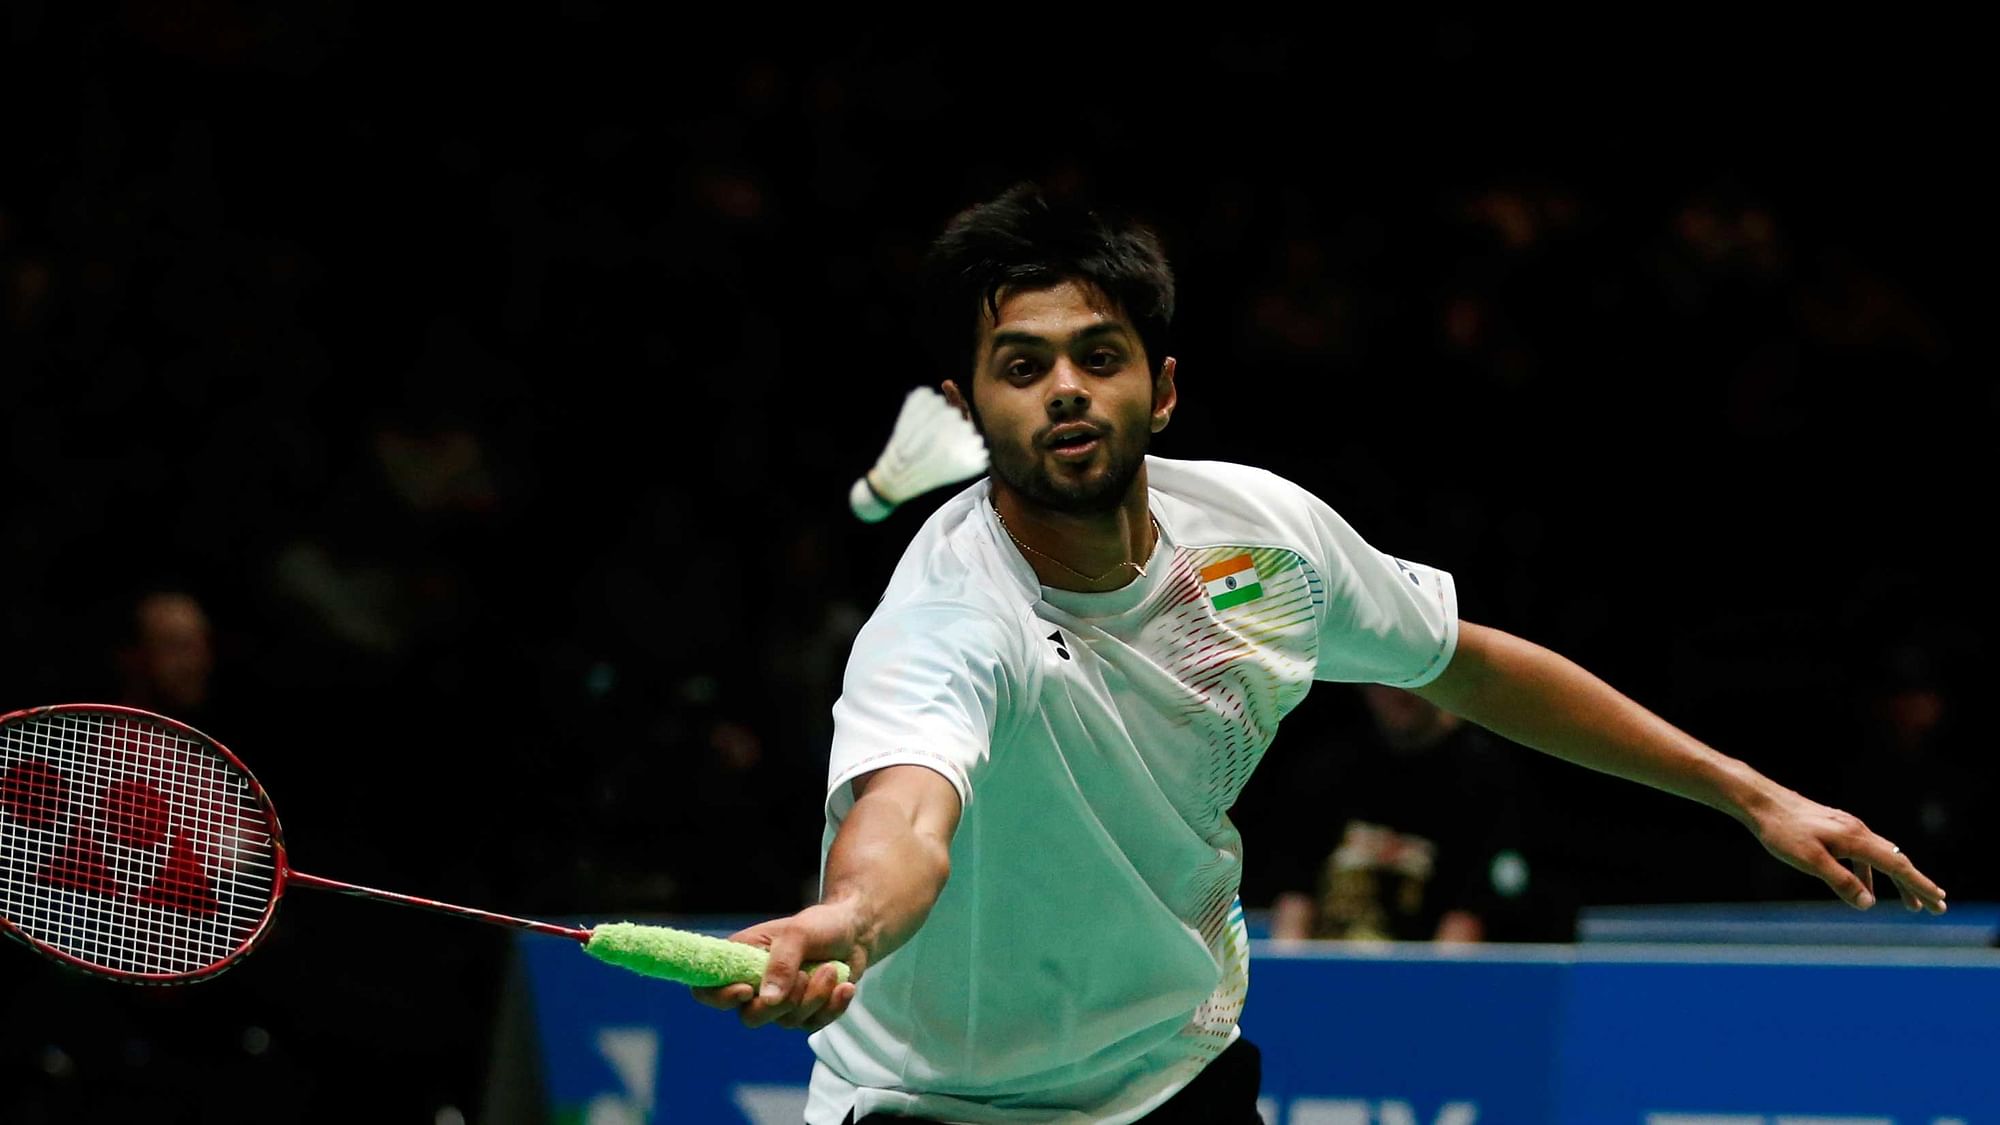 Indian shuttler B Sai Praneeth was knocked out of the BWF World Championships after a semifinal loss against World no 1 Kento Momota.